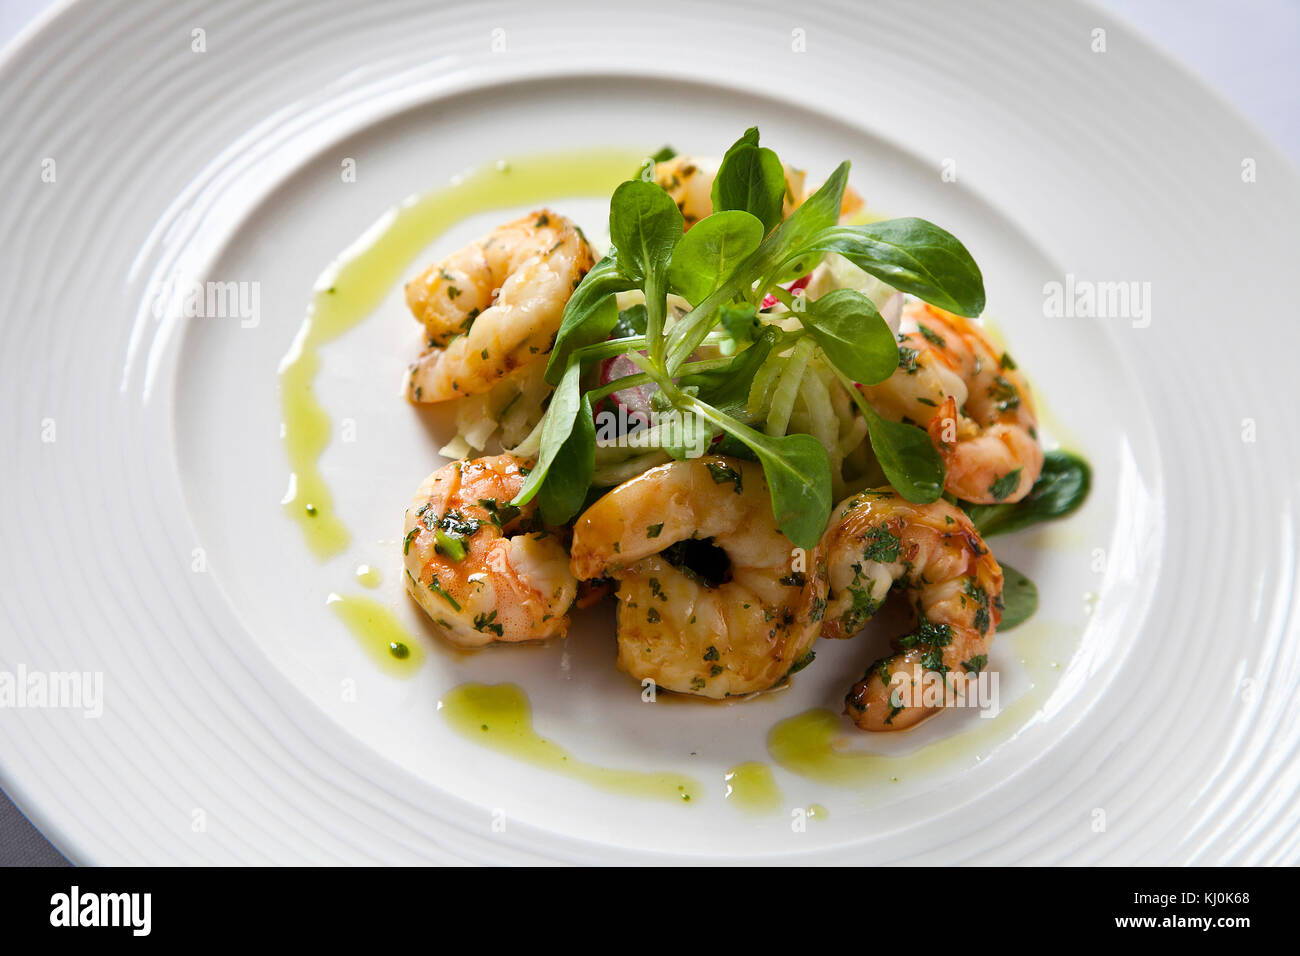 King prawns in garlic and herbs with green cress on white plate Stock Photo